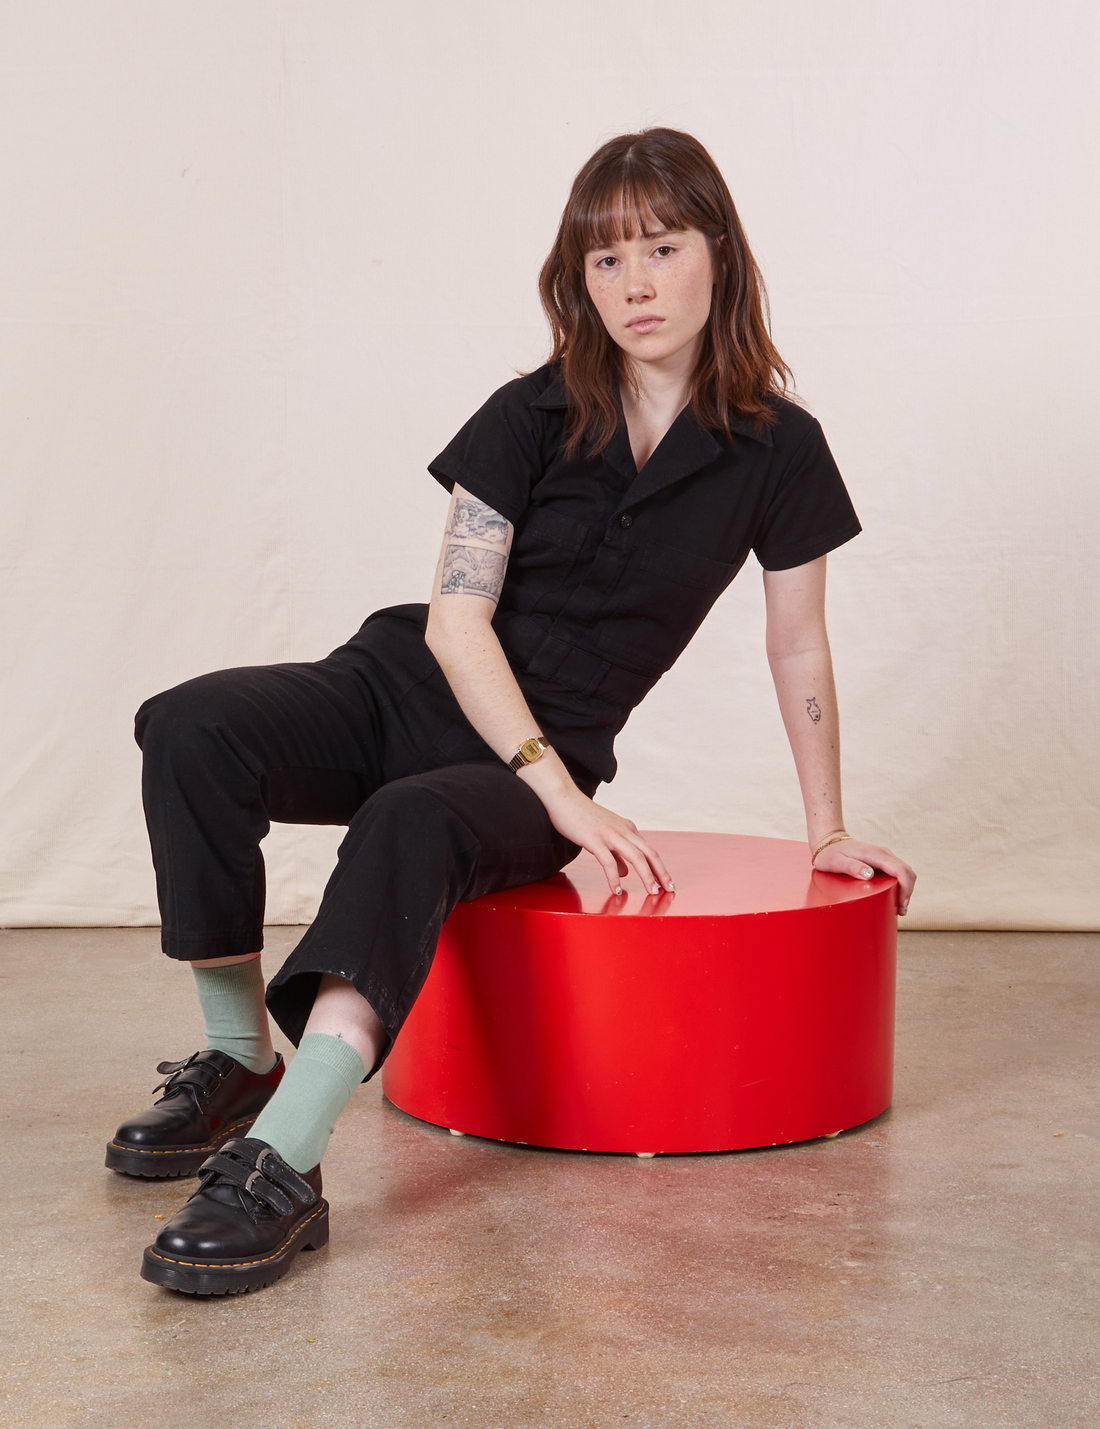 Hana is sitting on a red circular stand wearing Petite Short Sleeve Jumpsuit in Basic Black